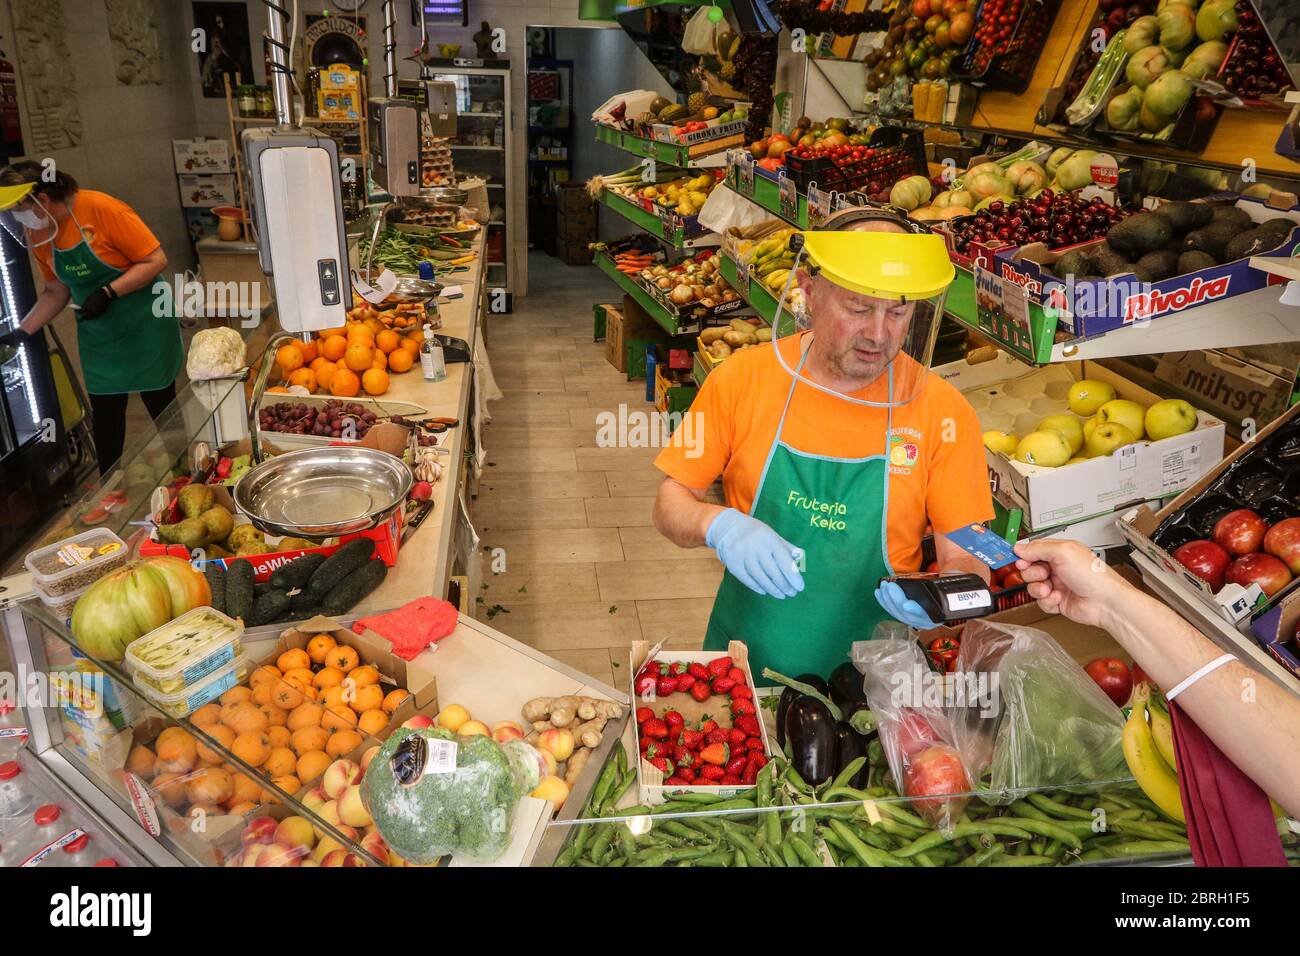 May 21, 2020: 21 May 2020 (Malaga) fruterÃ-a of barrio de lagunillas opens to the public with security measures due to the coronavirus crisis Credit: Lorenzo Carnero/ZUMA Wire/Alamy Live News Stock Photo